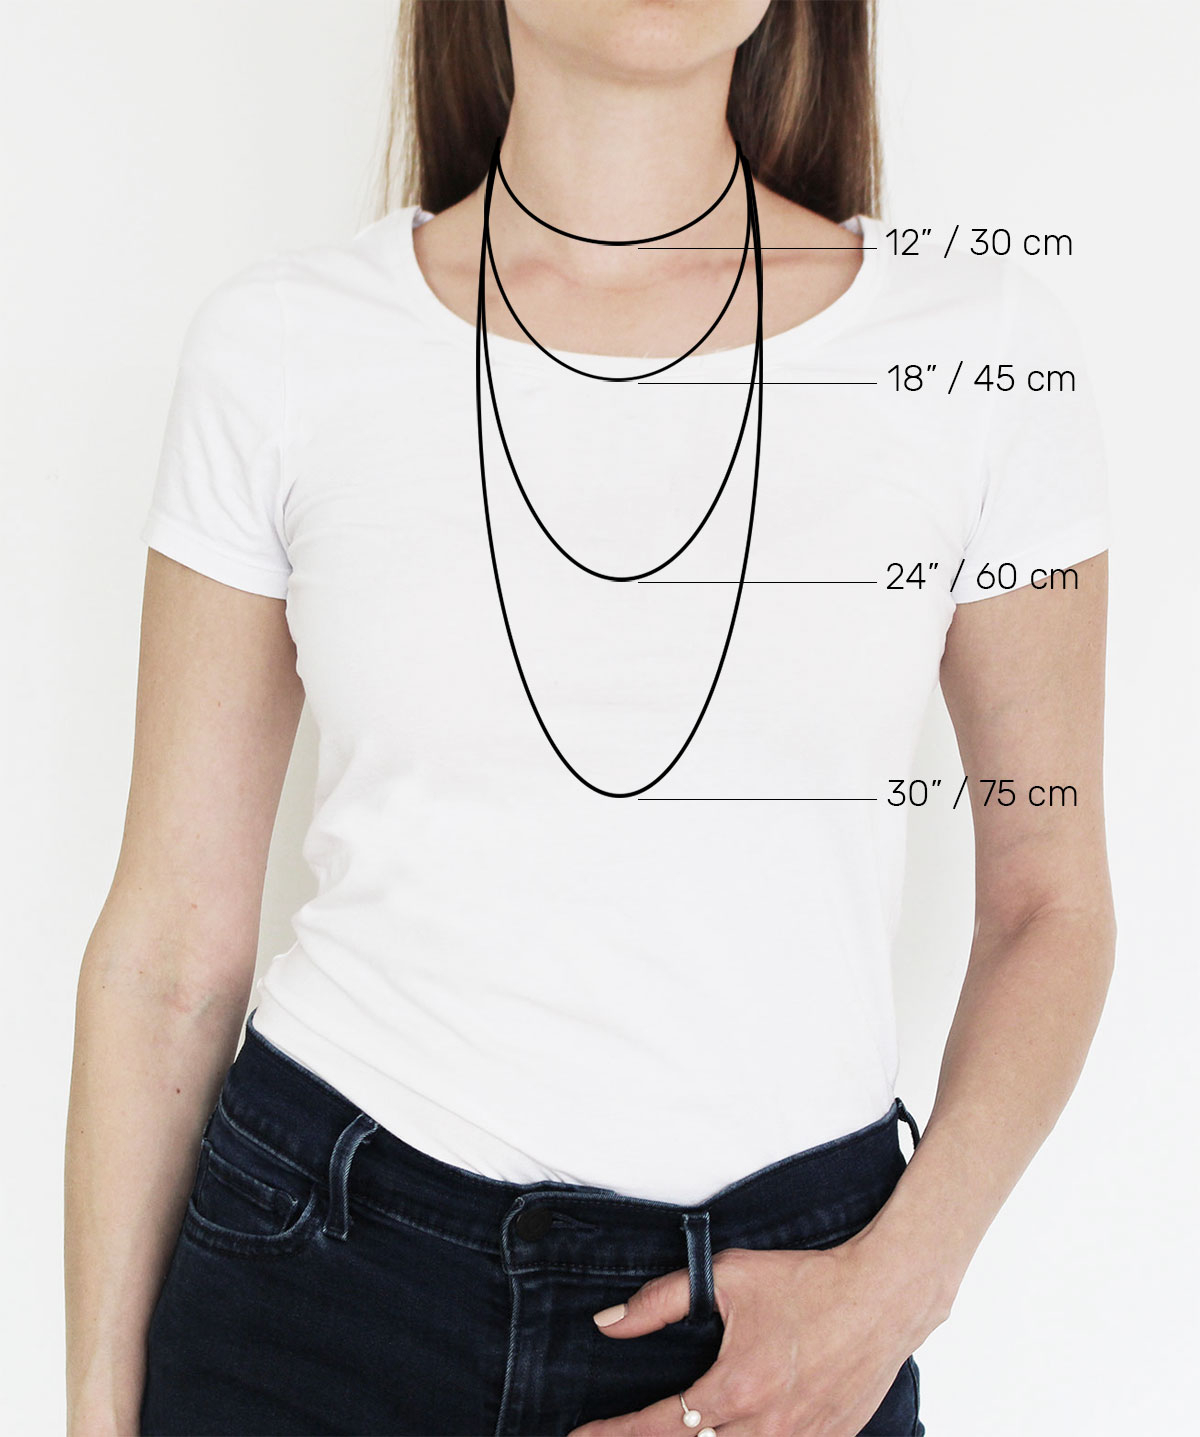 Necklace Length Diagram Care And Sizes Inbal